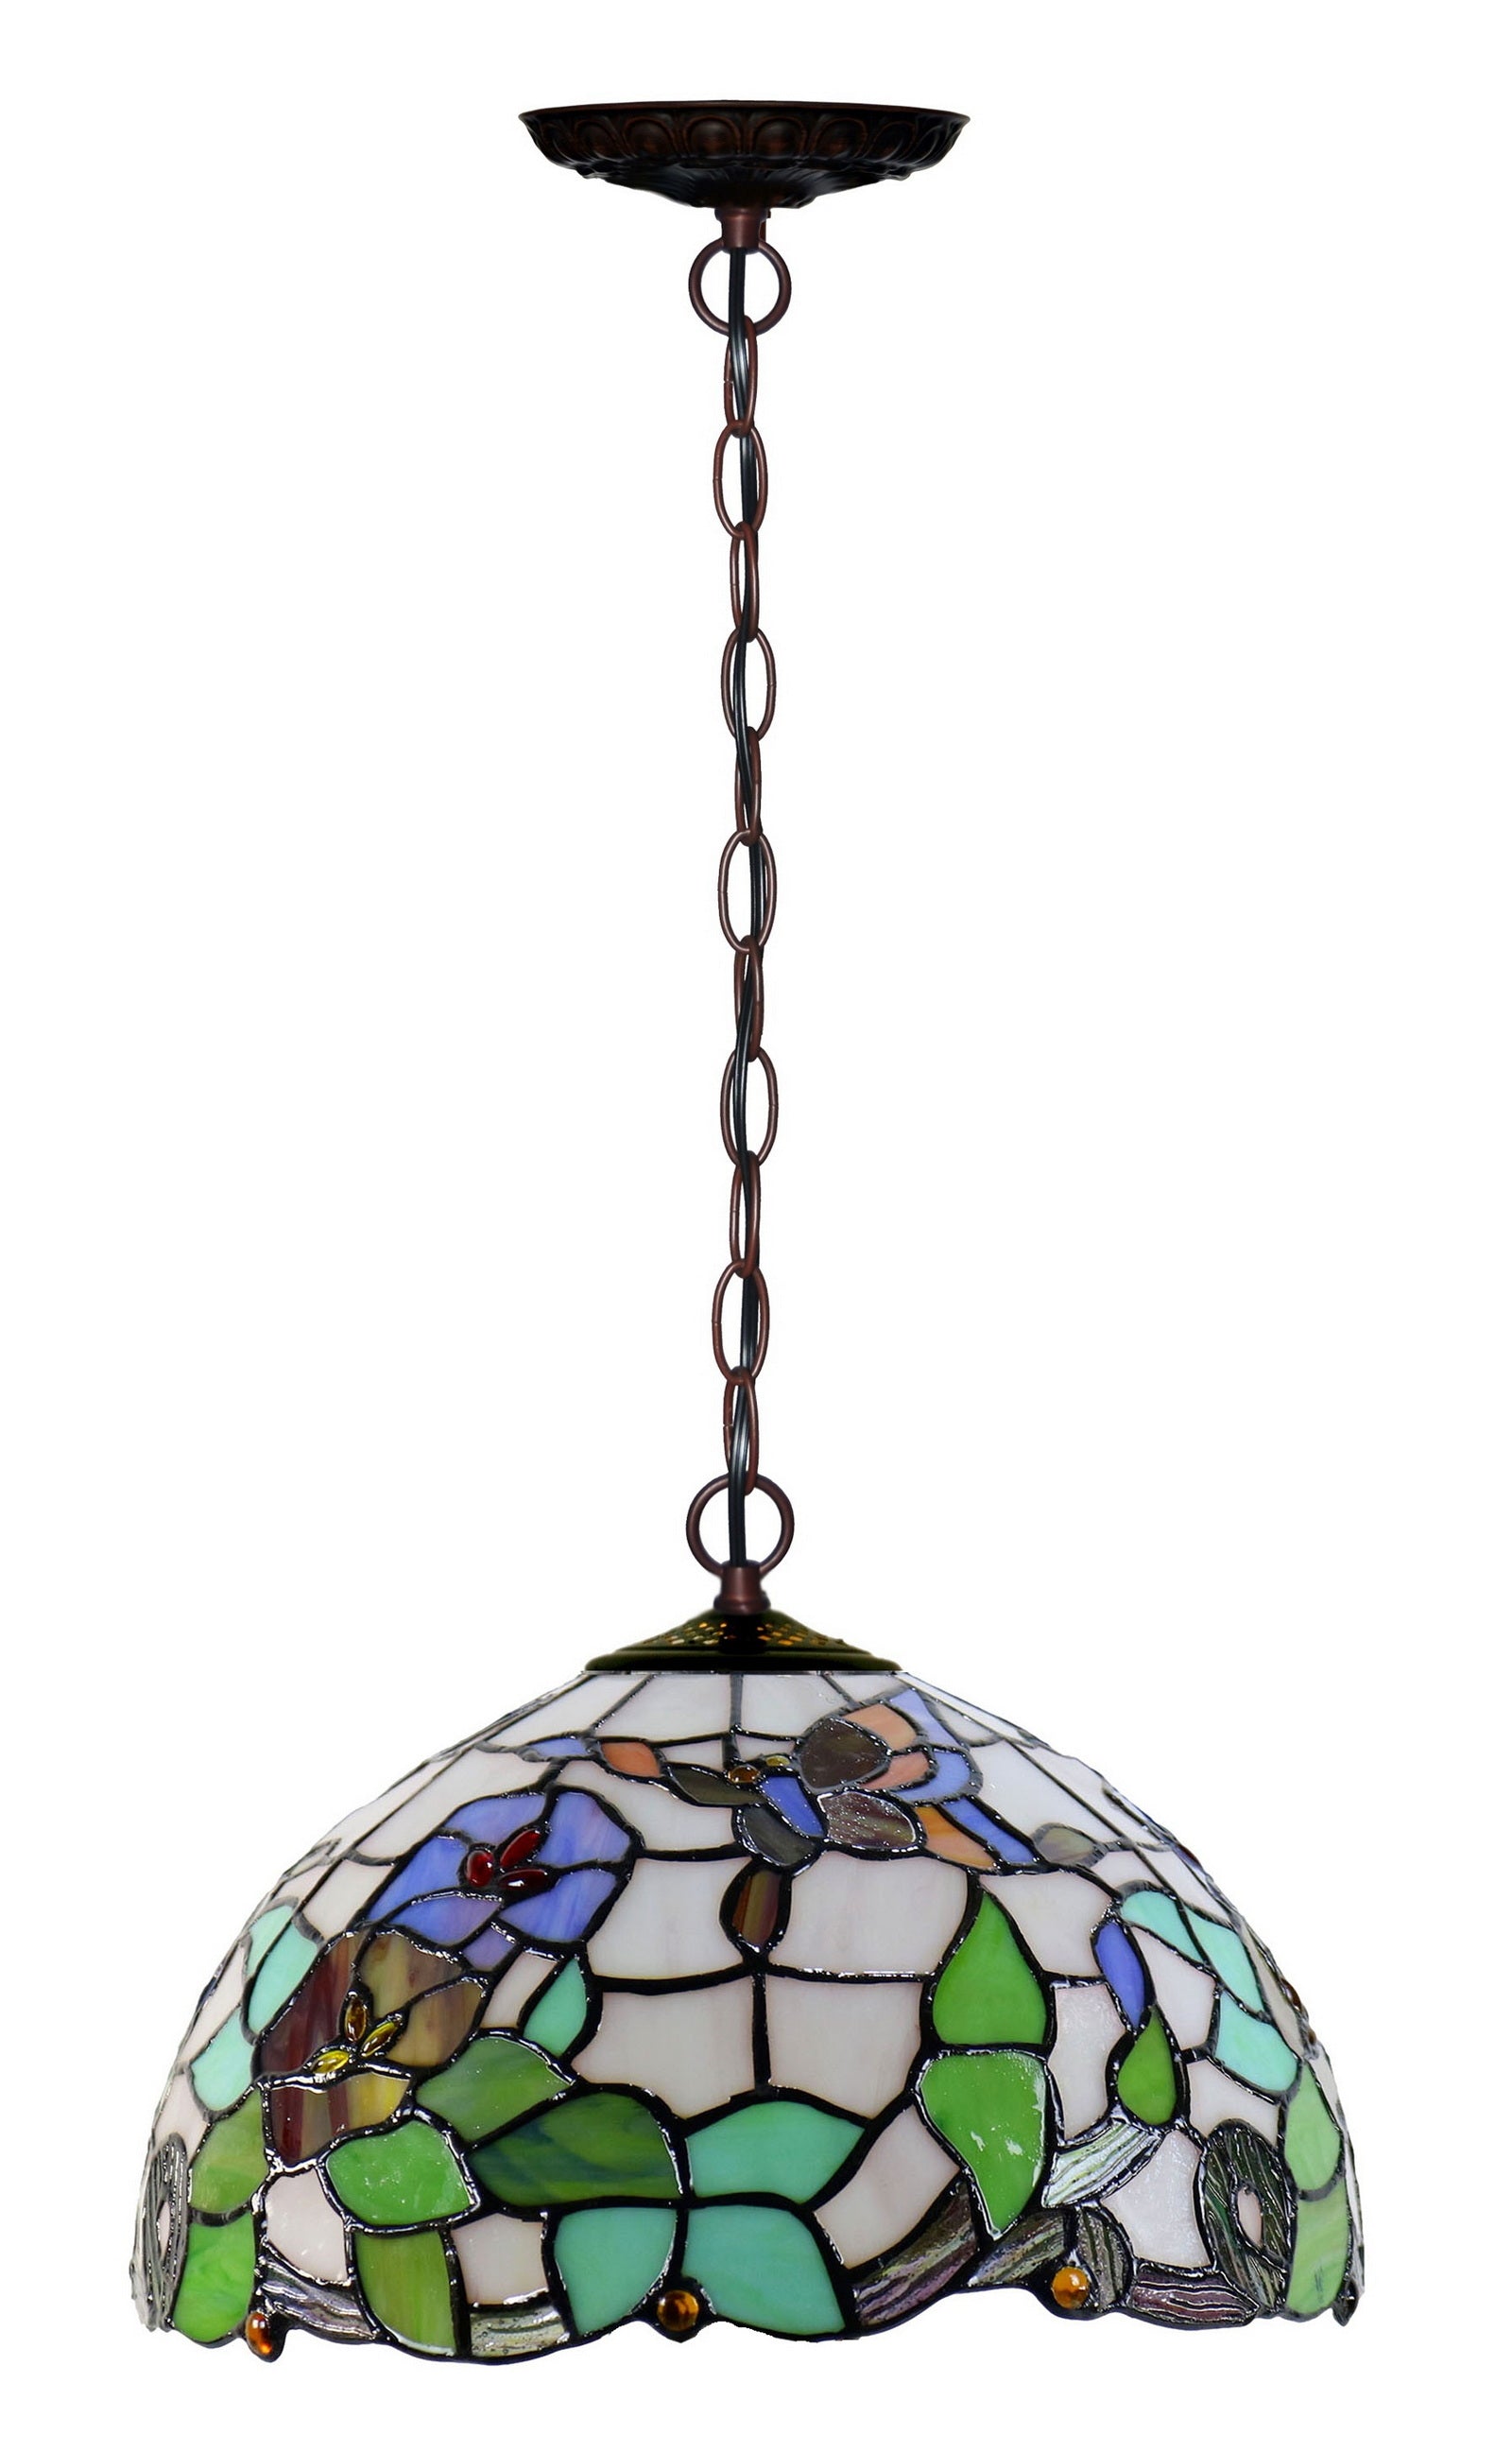 12 “ Classical Butterfly Flower Moring Glory Style Tiffany Pendant light